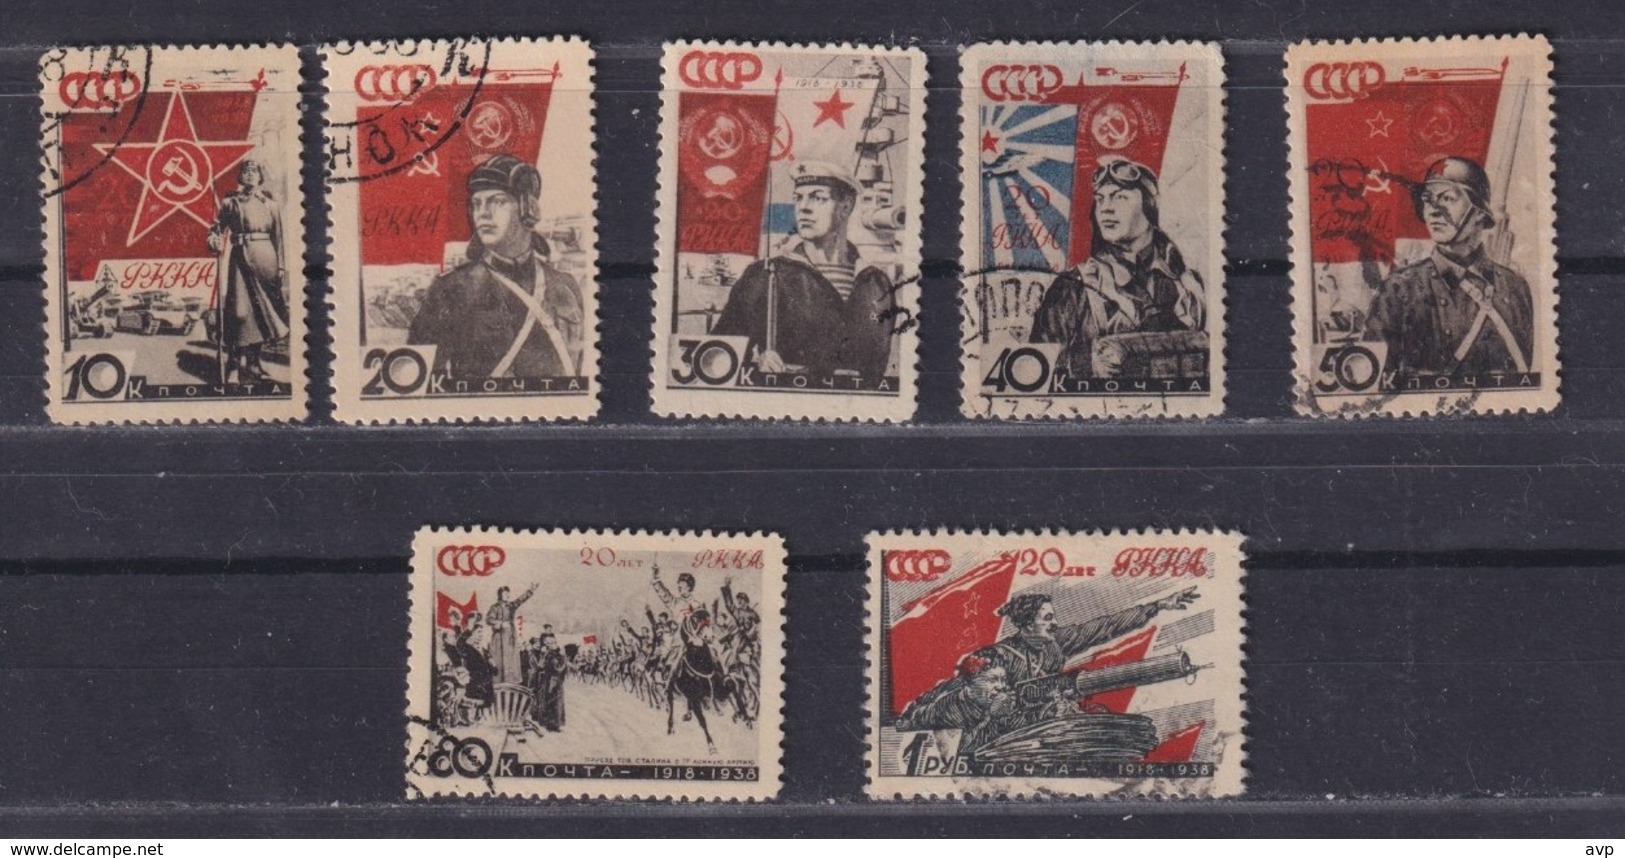 USSR 1938 Michel 588-594 20th Anniversary Of Red Army. Used - Oblitérés